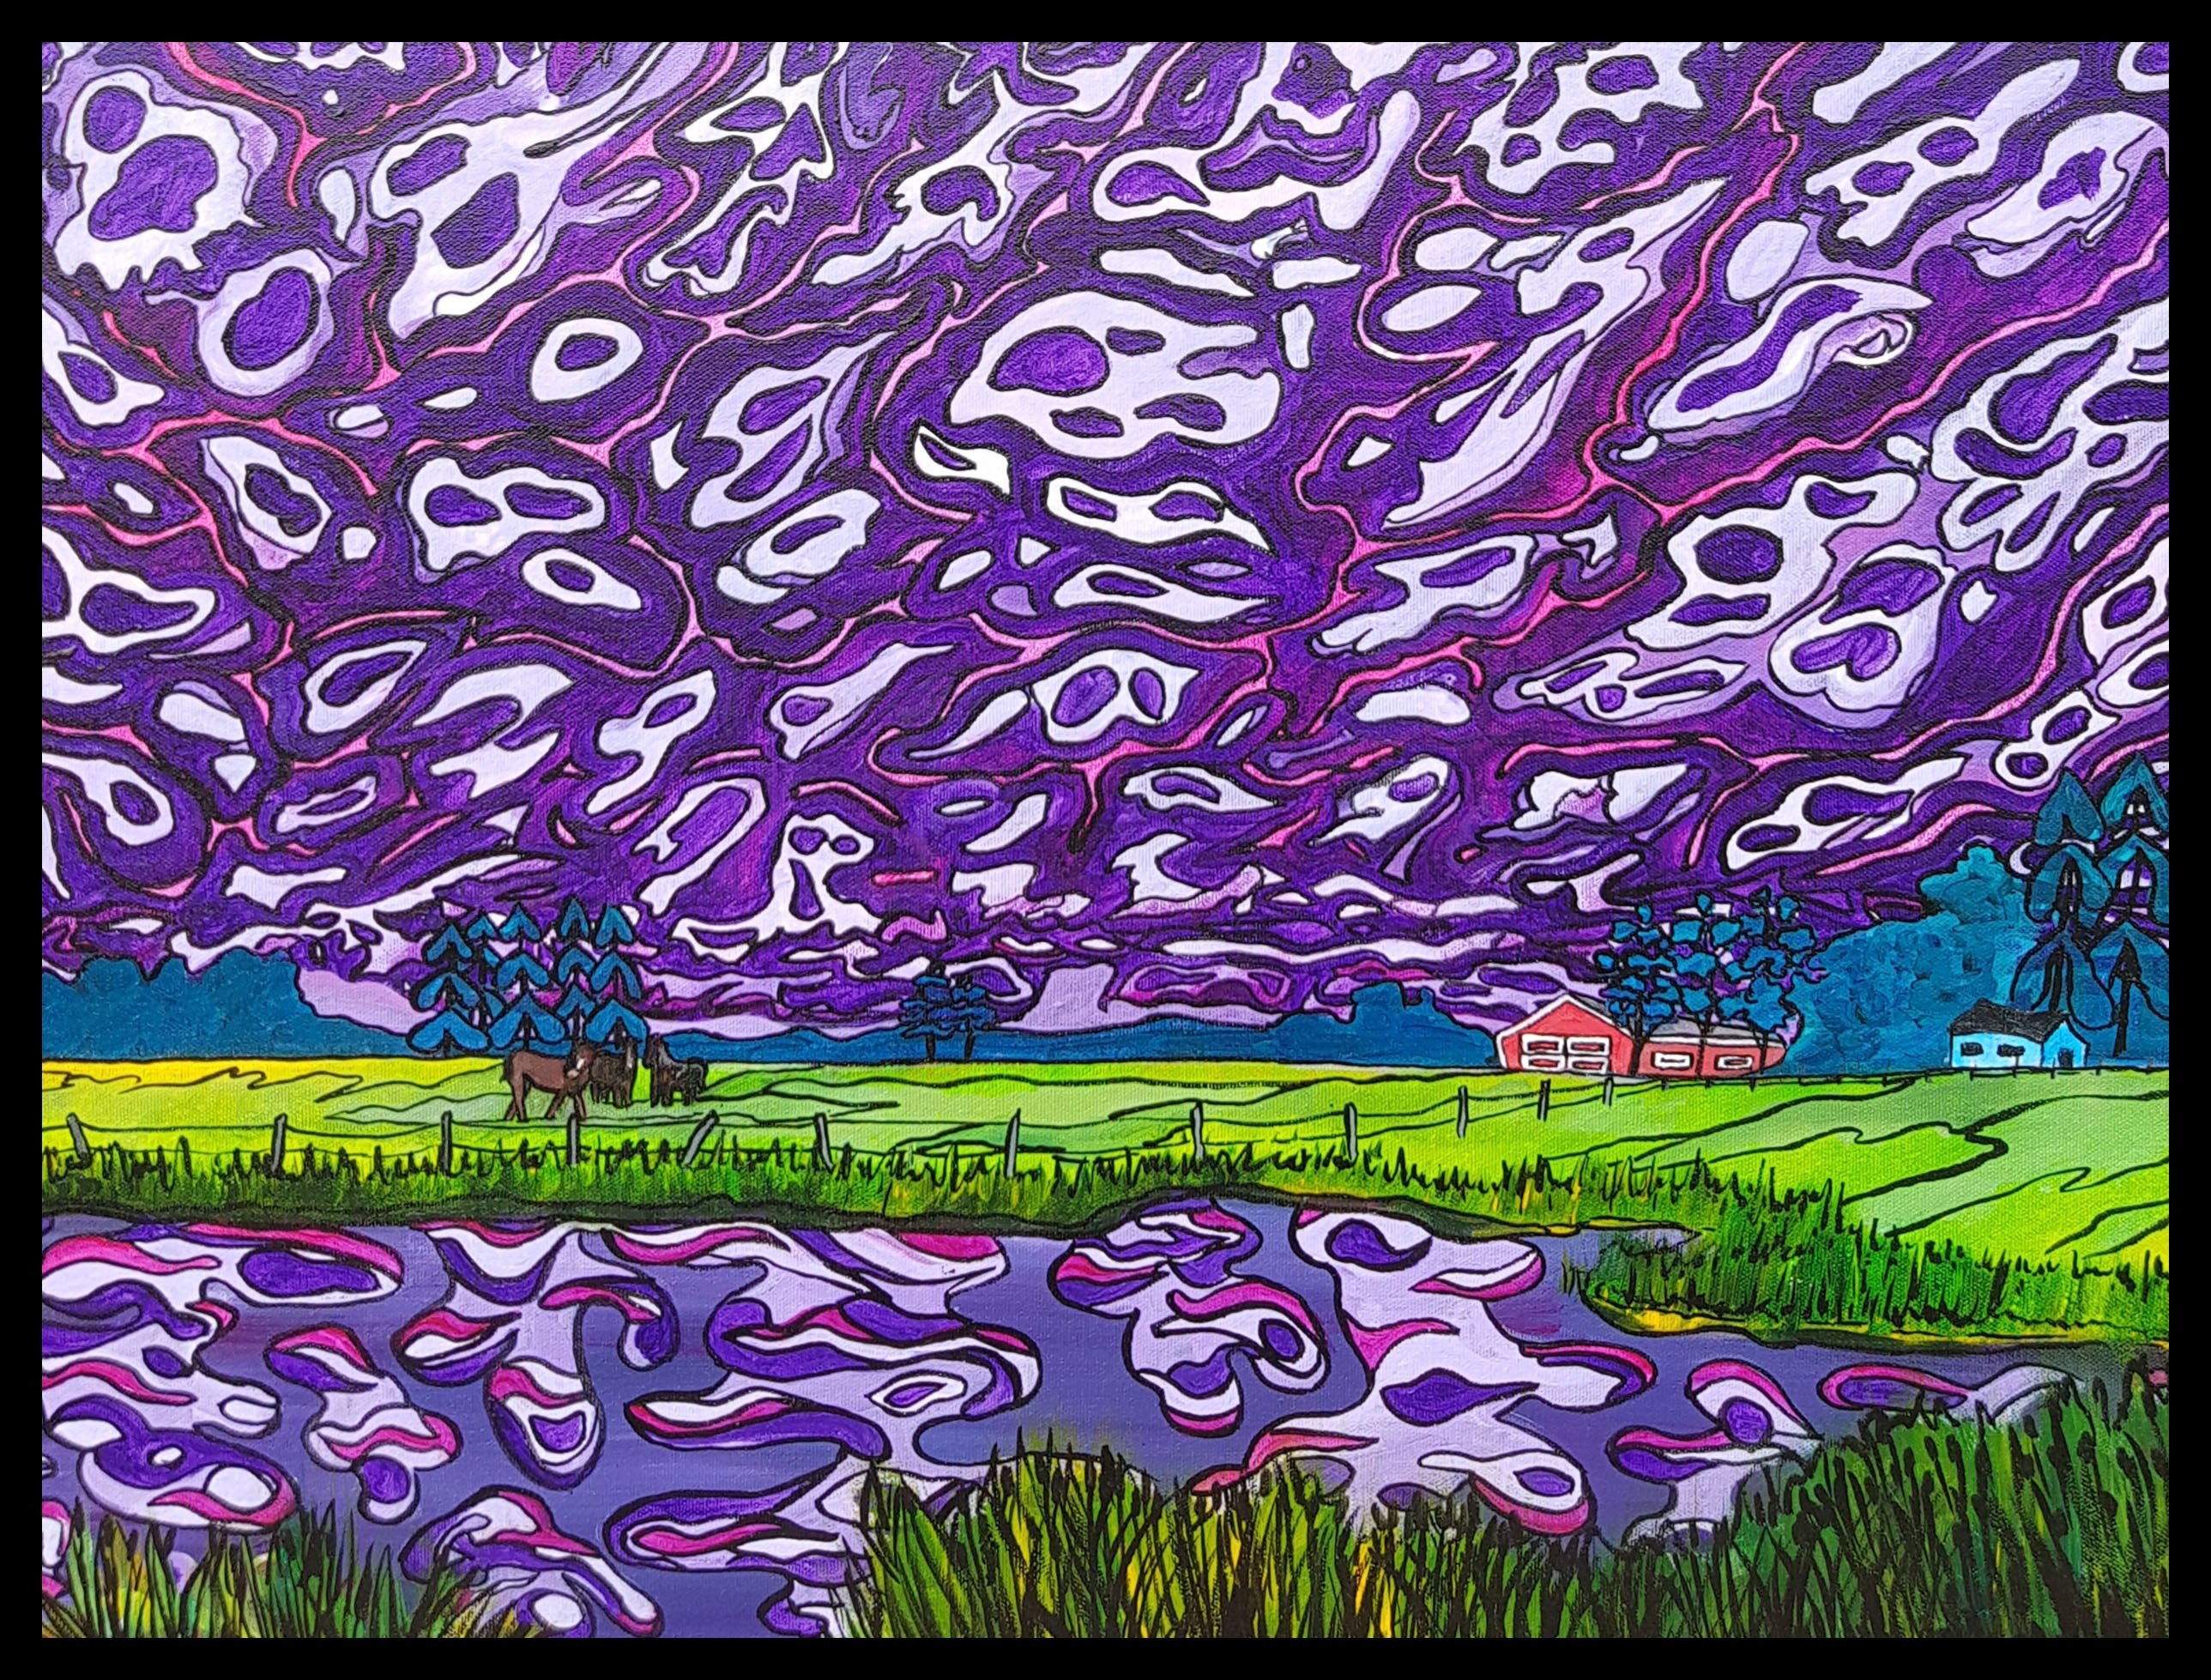 "Prairie Rhapsody" [2018]
Image: 24" x 18"
Framed: 25.5" x 19.5"
Acrylic on canvas
Commissioned - SOLD